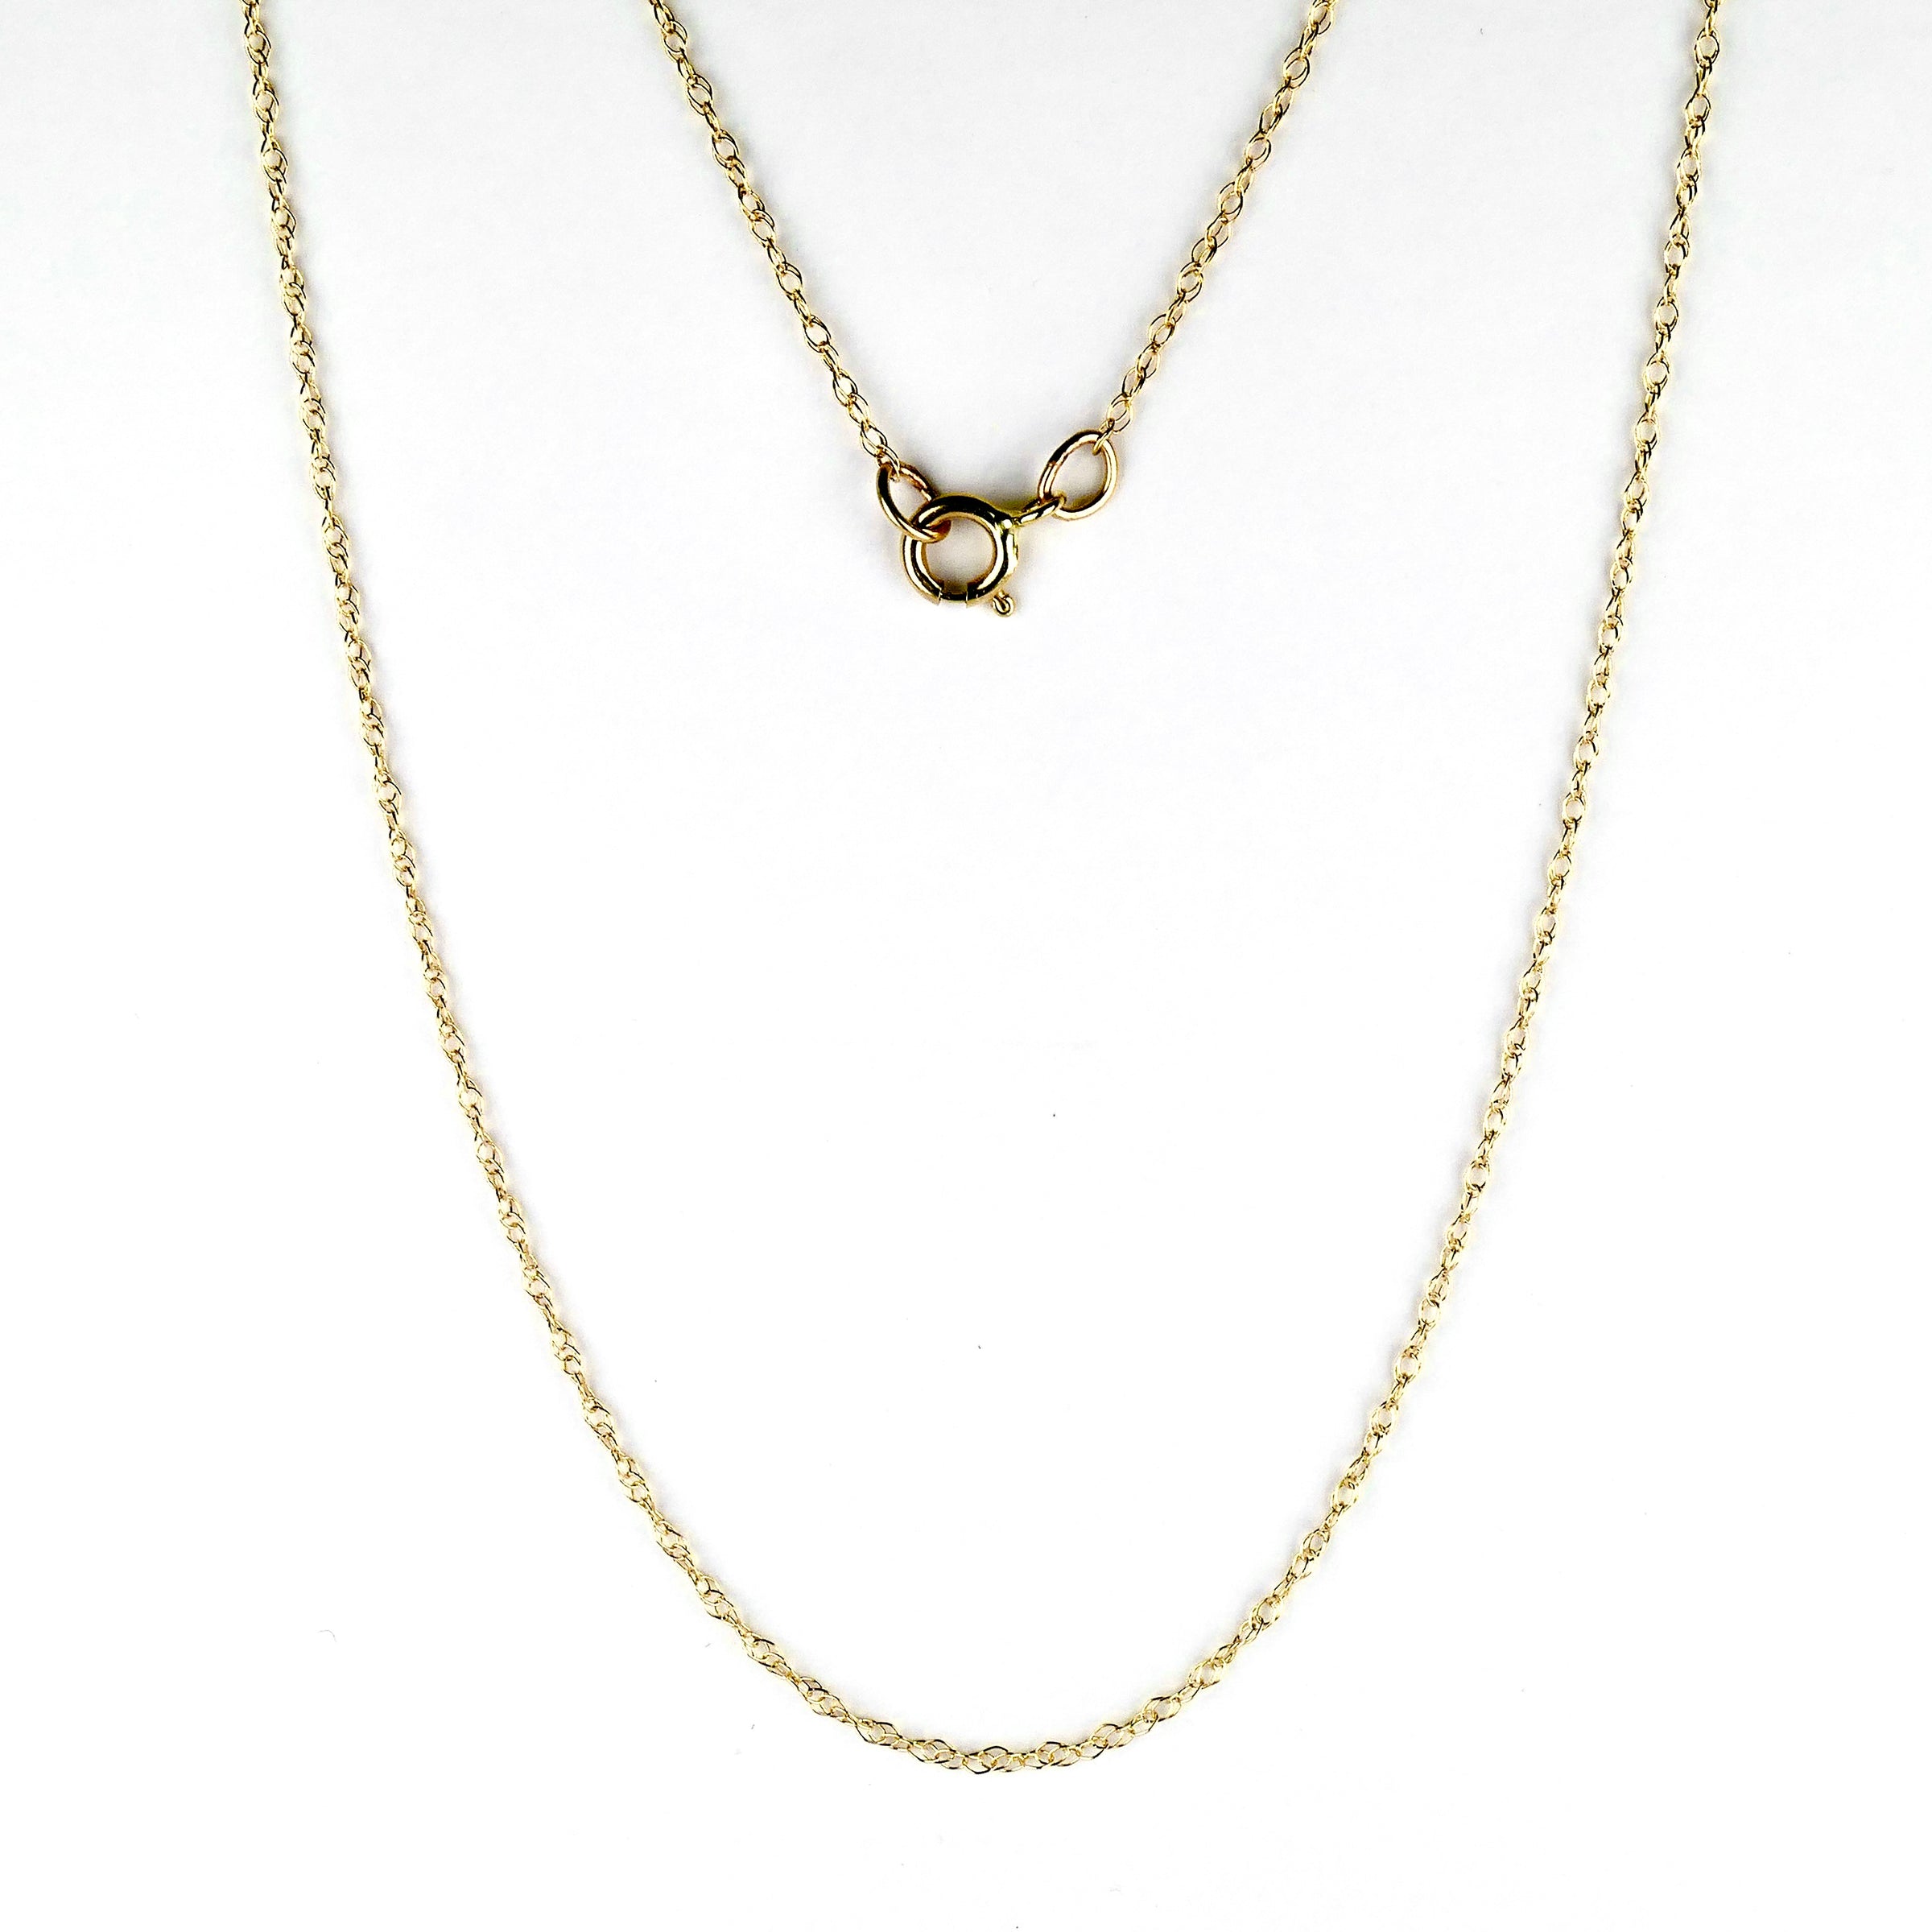 14K Yellow Gold 16” Light Rope Chain Necklace